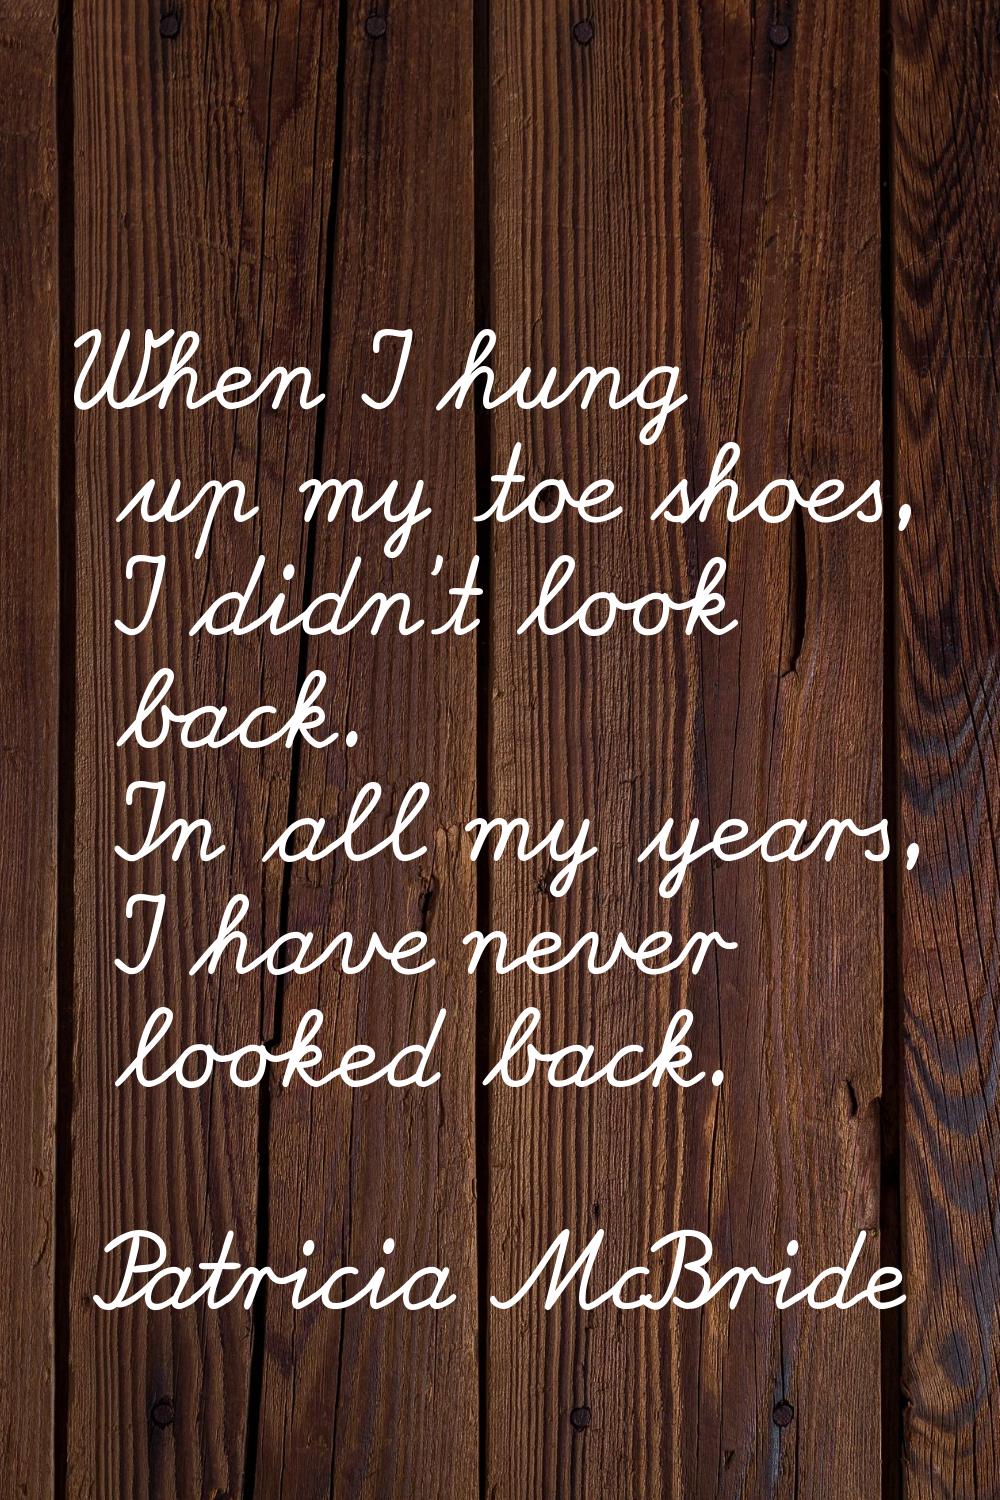 When I hung up my toe shoes, I didn't look back. In all my years, I have never looked back.